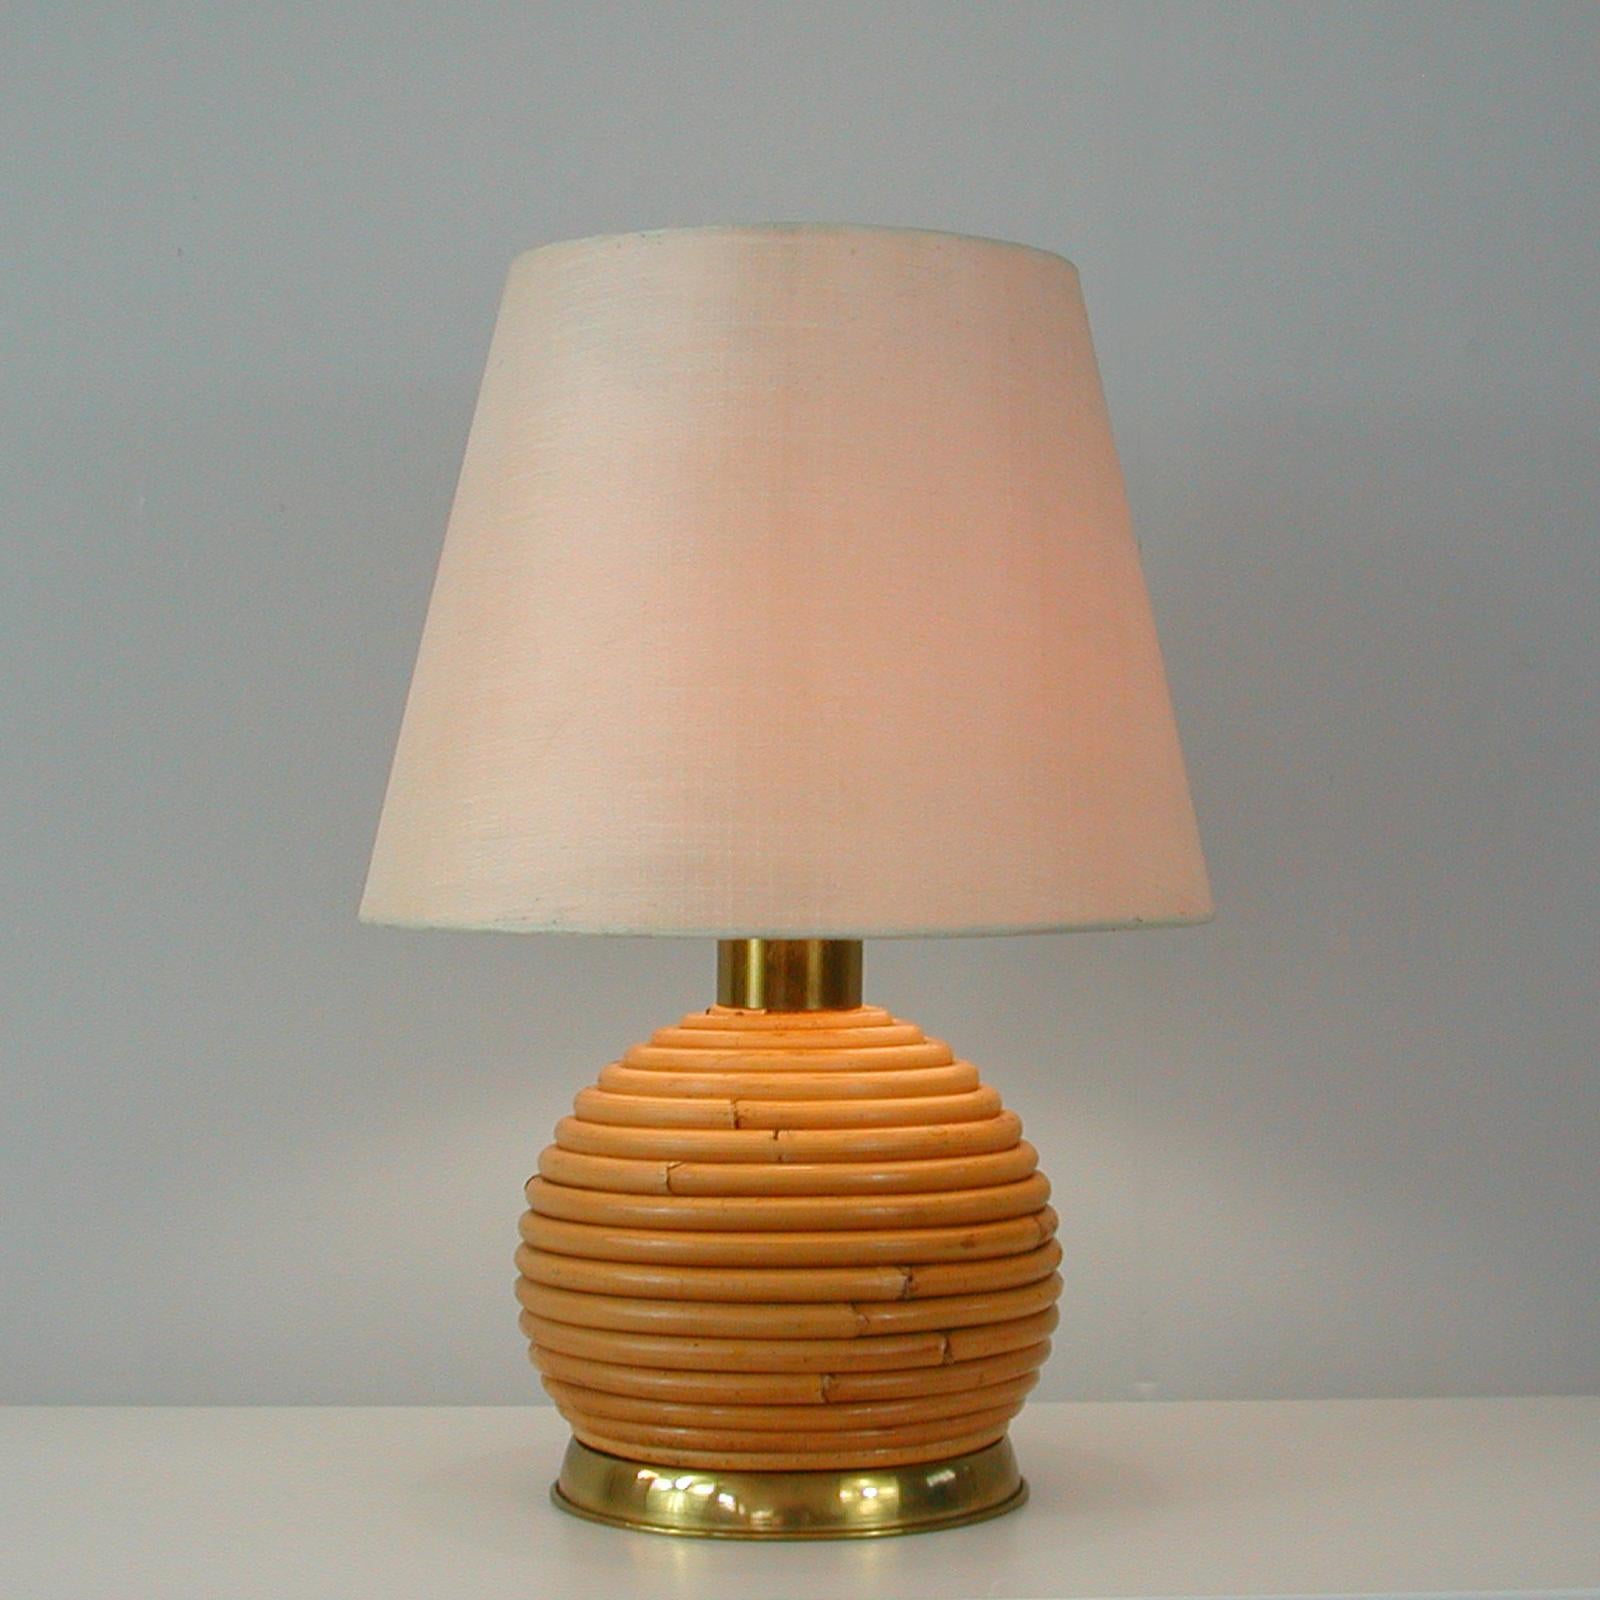 Midcentury Bamboo and Brass Globe Table Lamp, Vivai del Sud attr. Italy 1960s For Sale 5